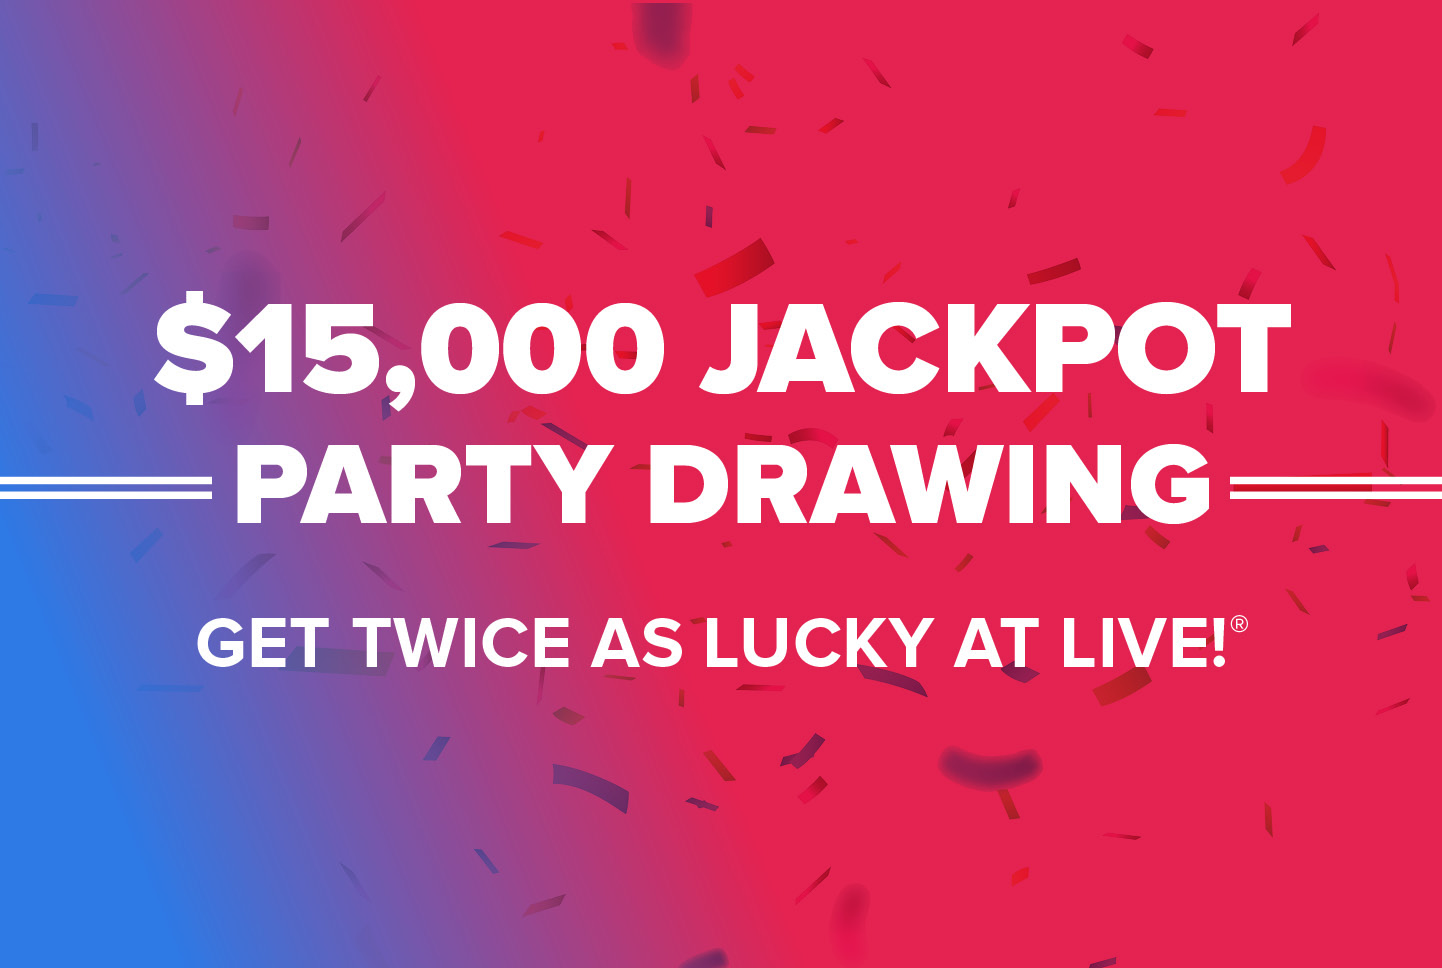 Jackpot Party Drawing